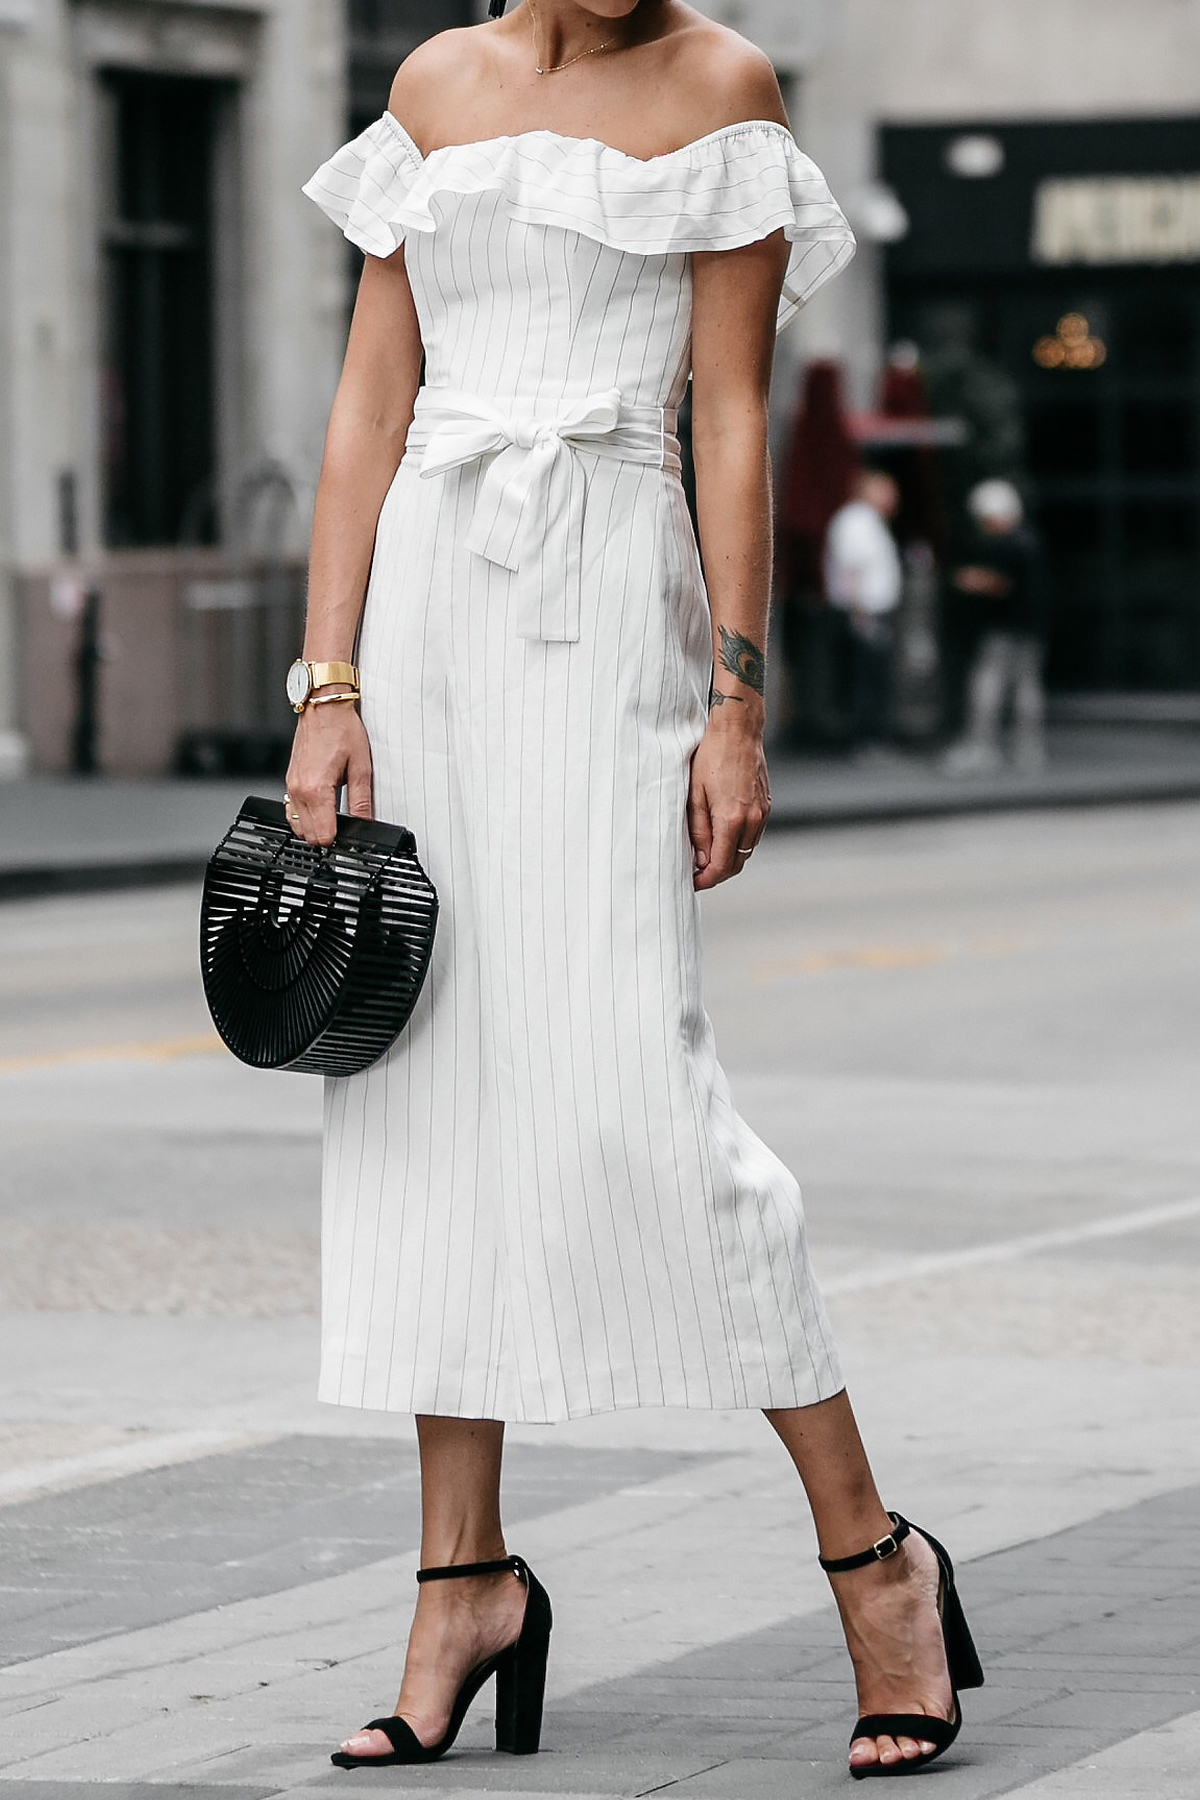 Blonde woman wearing Club Monaco off-the-shoulder ruffle white jumpsuit Cult Gaia Black Acrylic Ark Clutch Black Ankle Strap Heeled Sandals